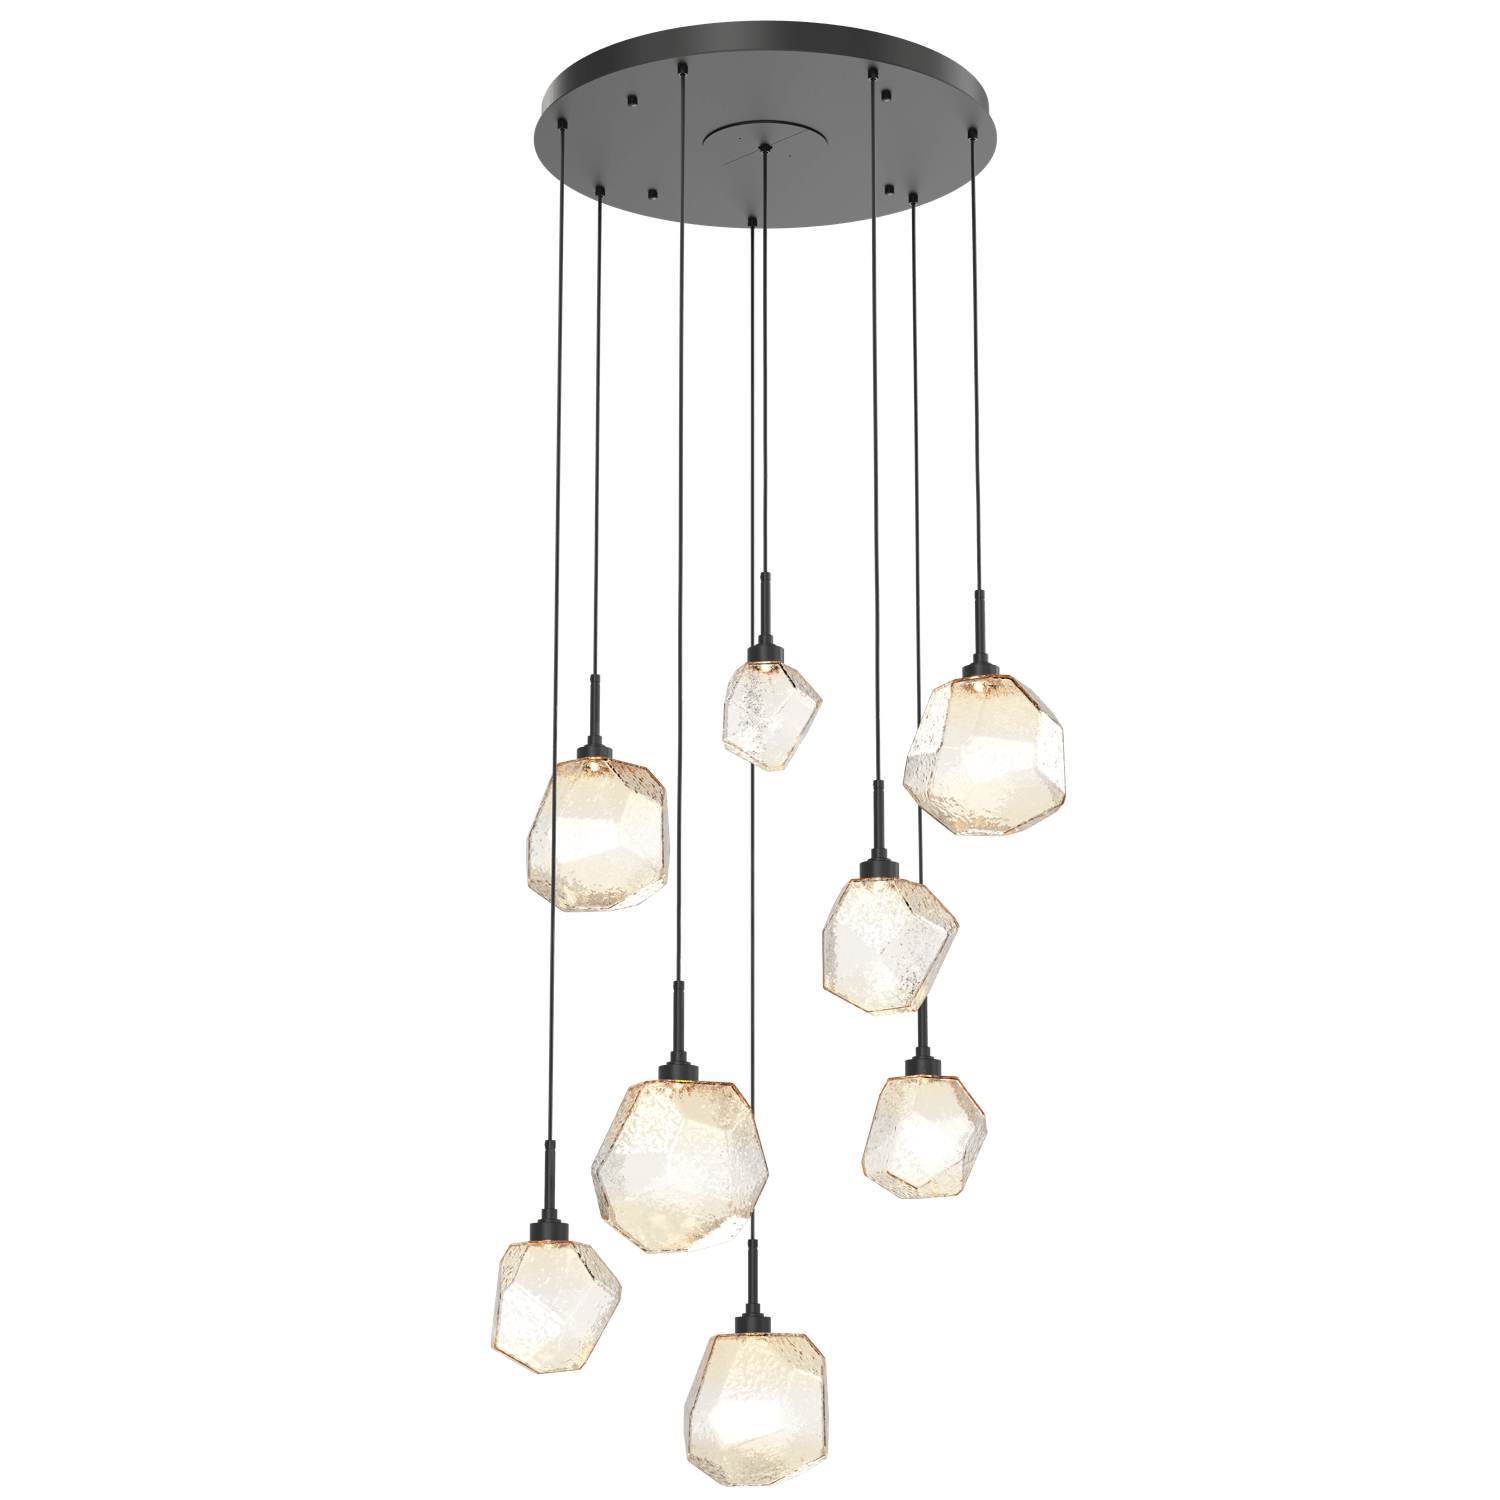 CHB0039-08-MB-A-Hammerton-Studio-Gem-8-light-round-pendant-chandelier-with-matte-black-finish-and-amber-blown-glass-shades-and-LED-lamping